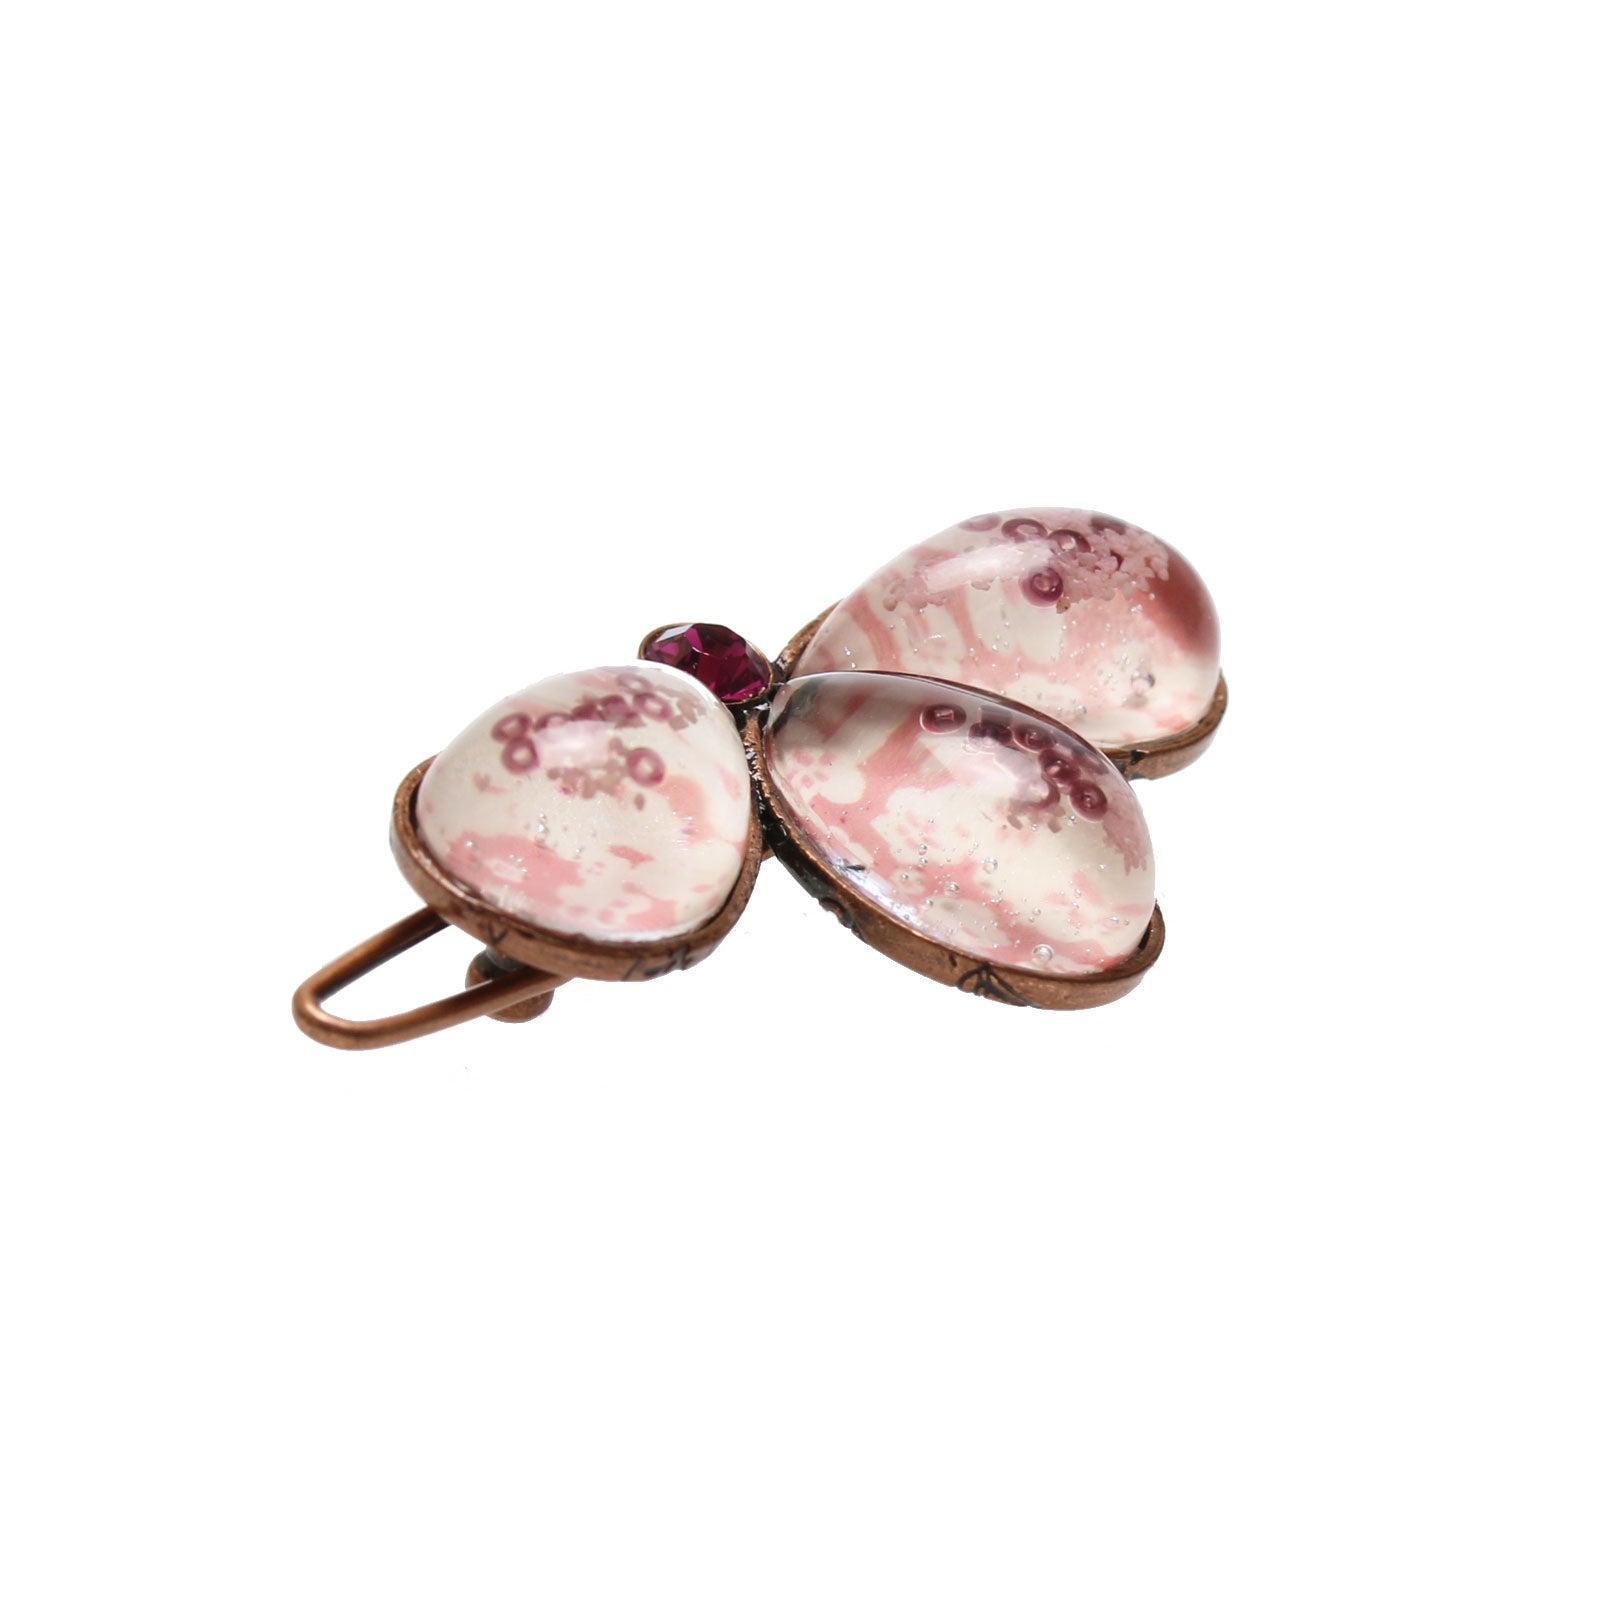 Hair Clip Plum Pink Antique Finished TAMARUSAN